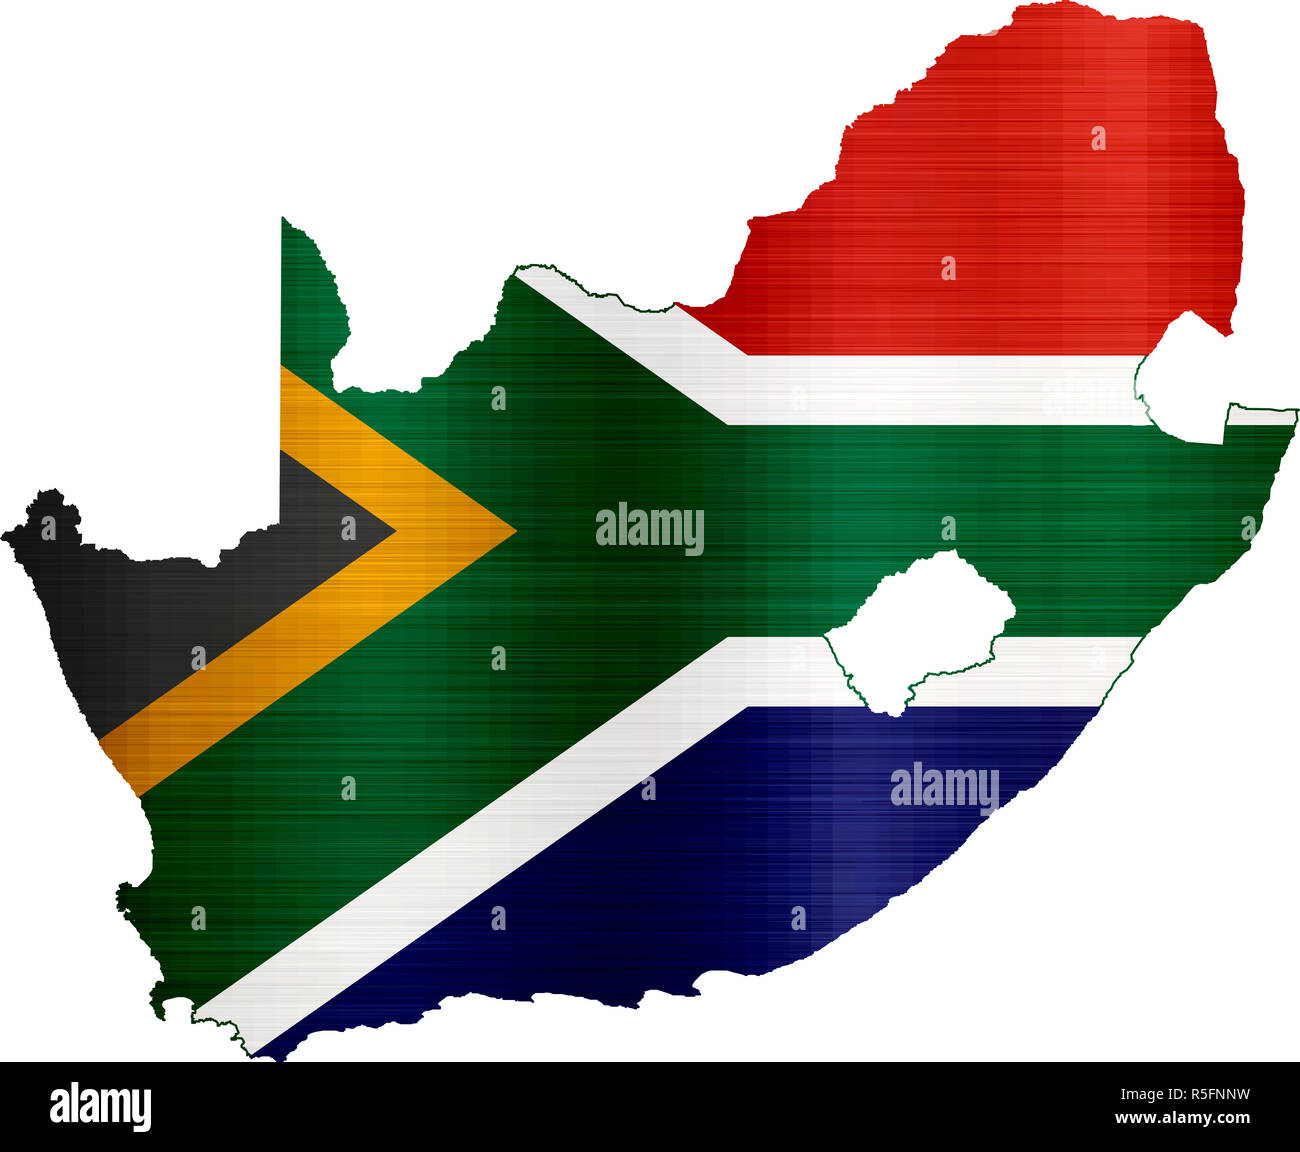 flag map south africa illustration Stock Photo